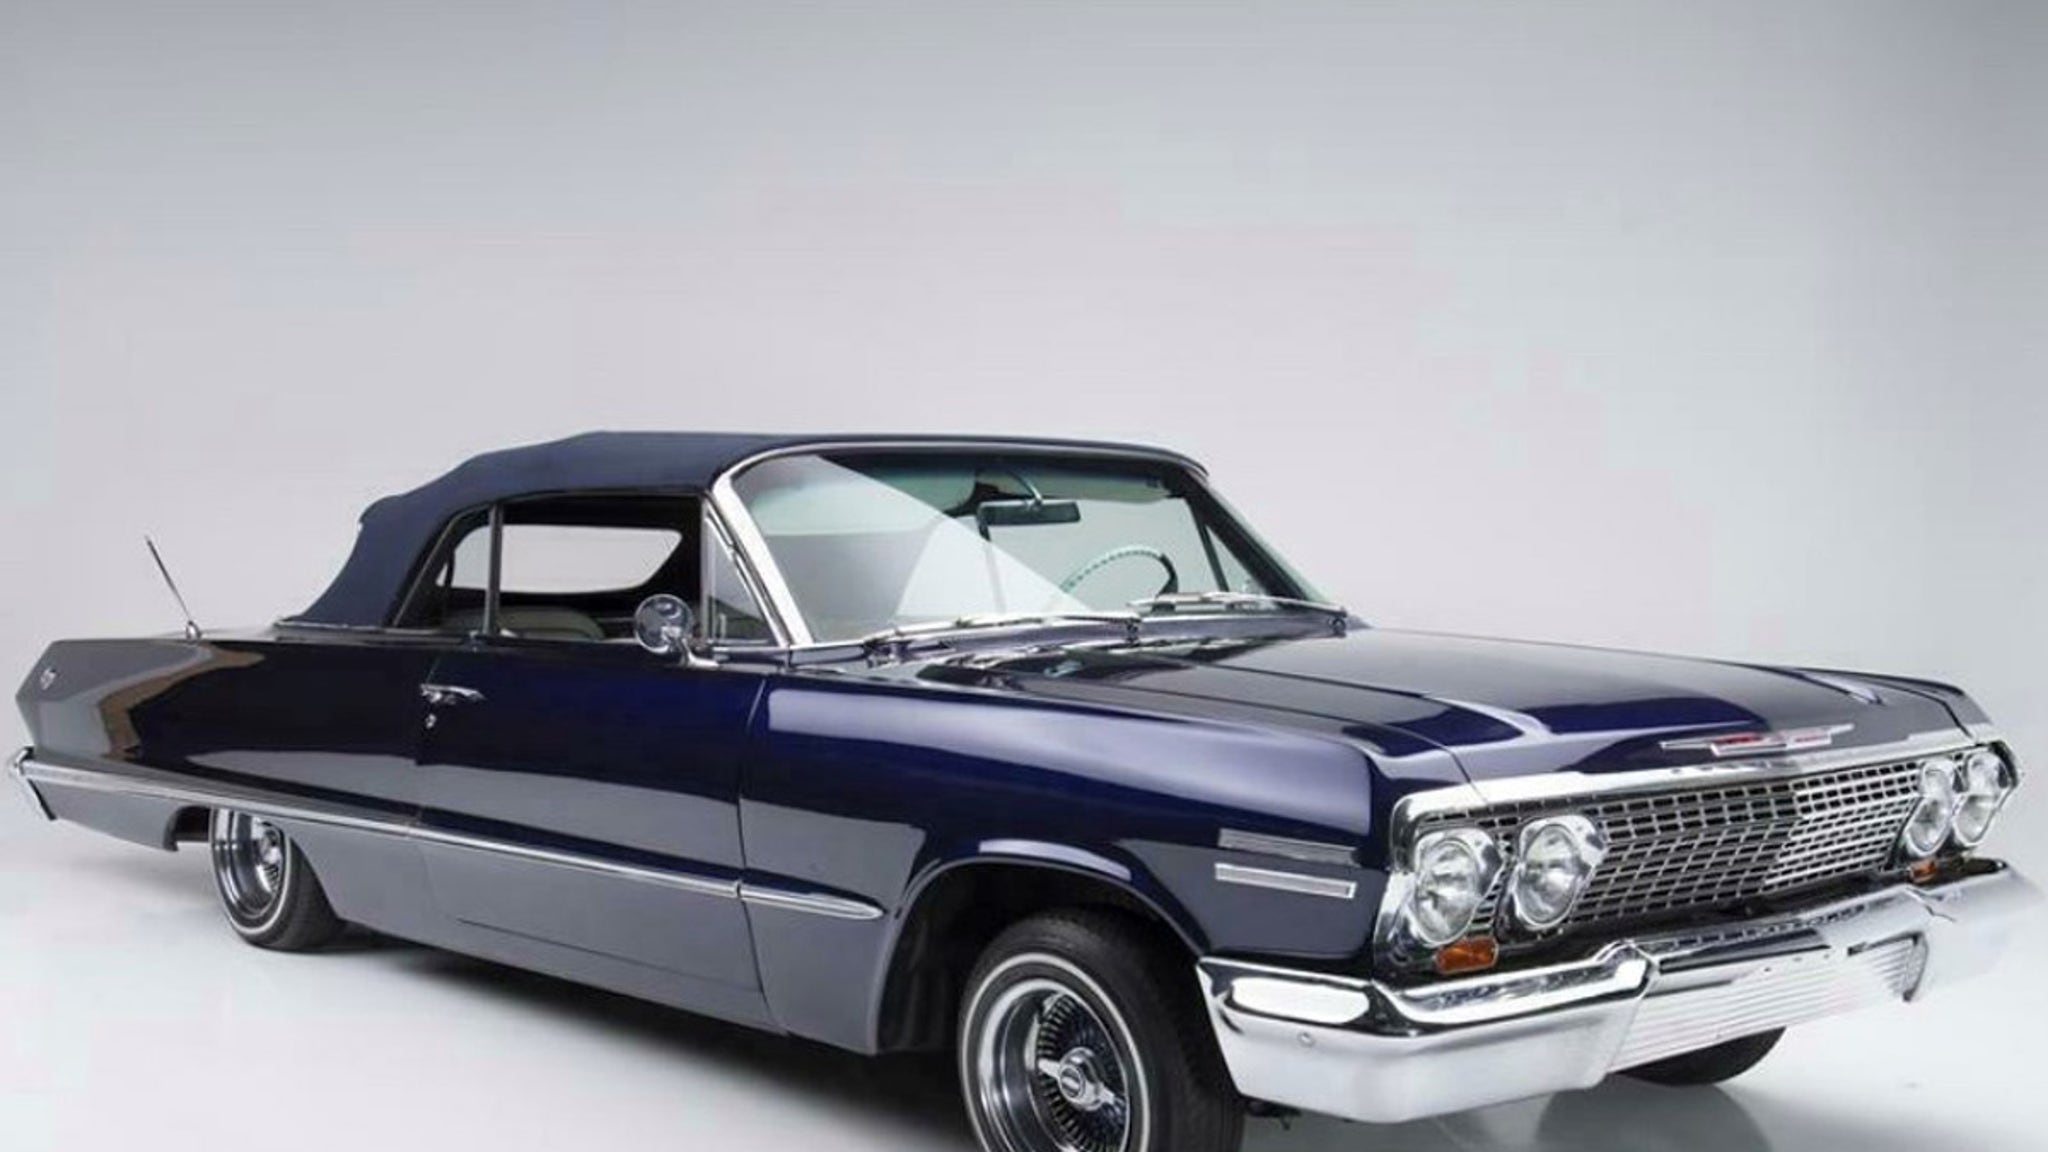 Old 1963 Chevy Impala from Kobe Bryant arrives for auction, could yield $ 250,000